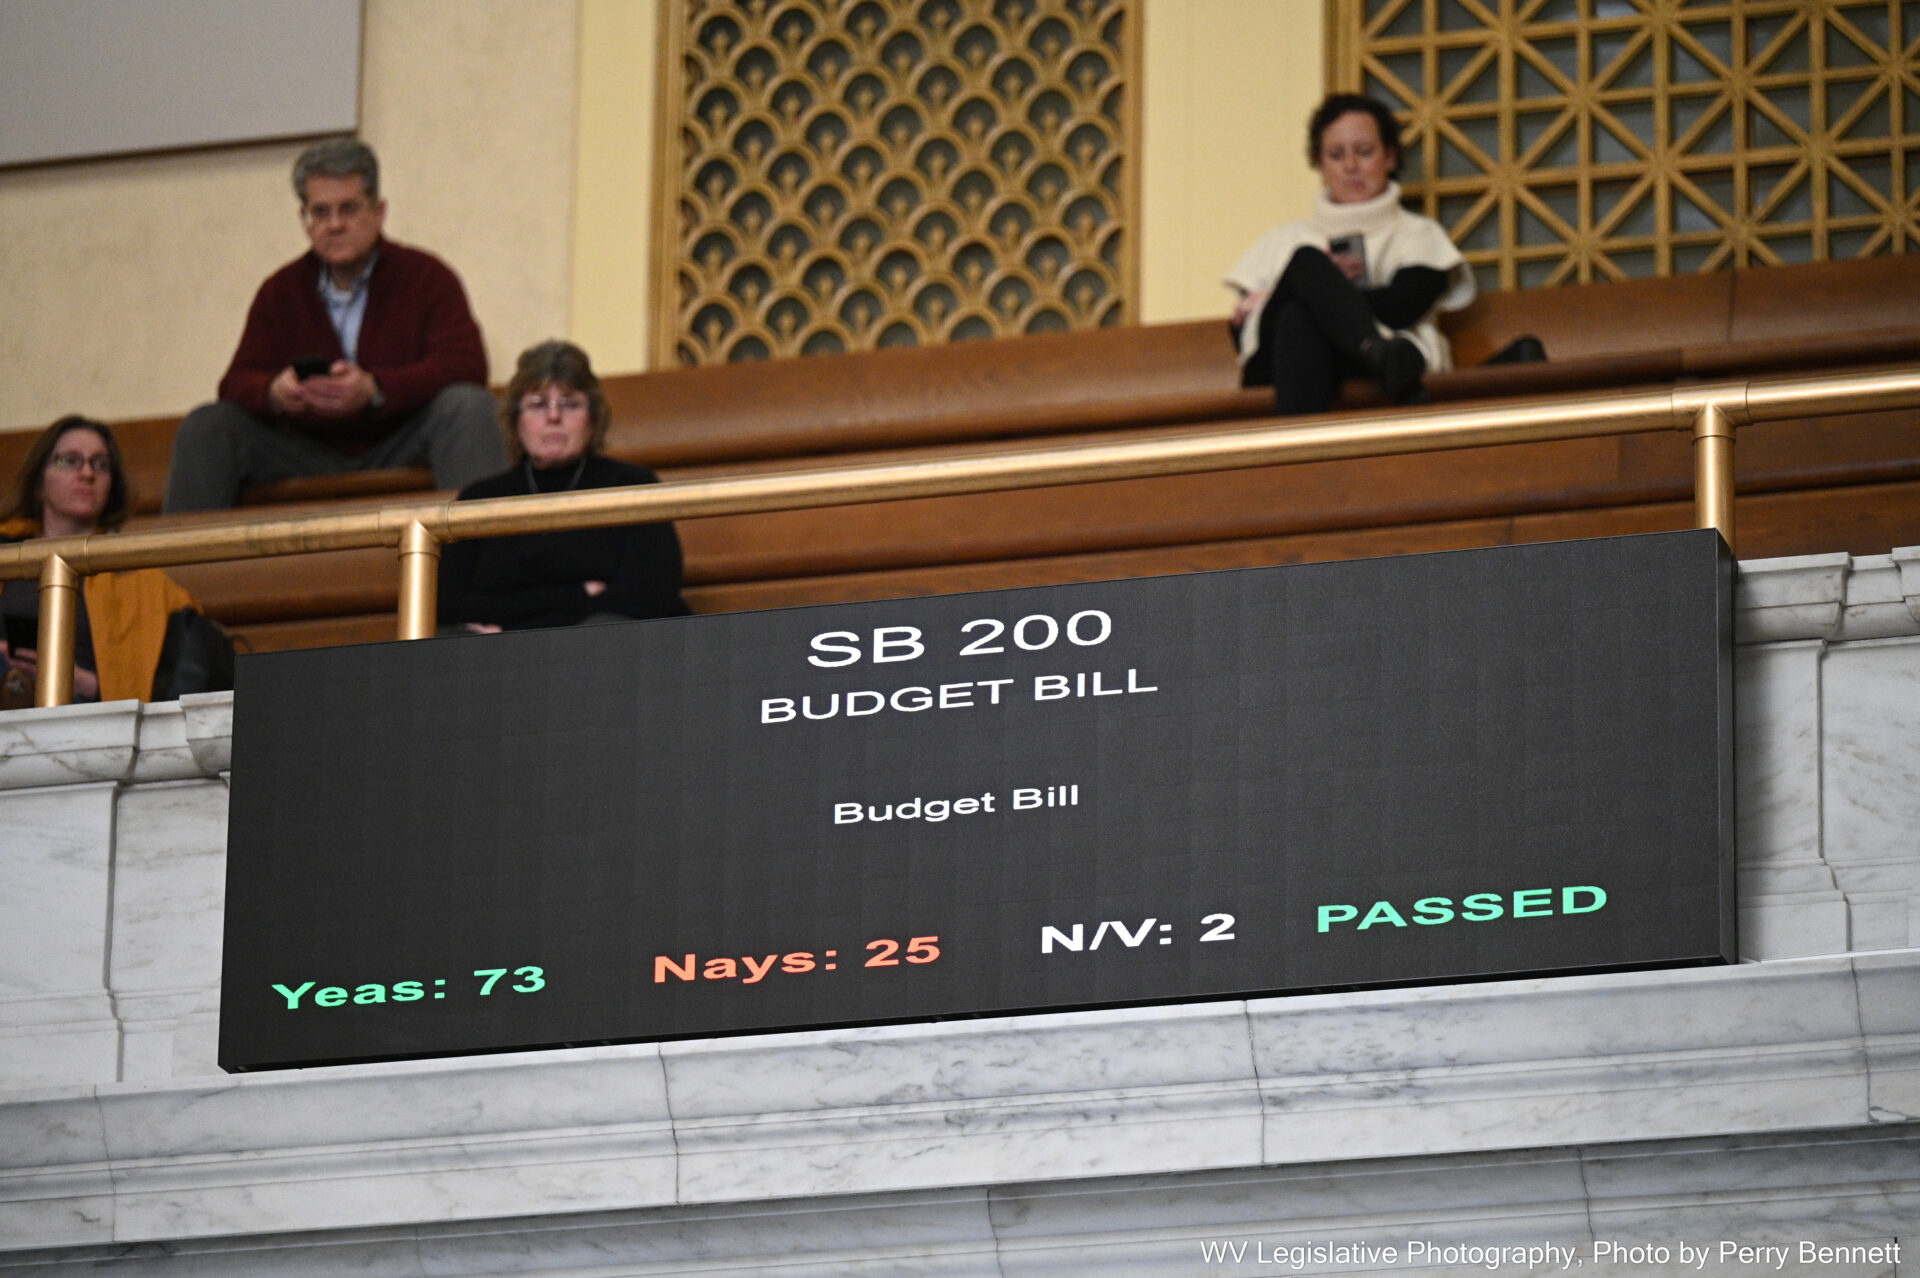 A screen displays a legislative budget bill and the votes cast by lawmakers. The votes read 76 yeas, 25 nays, and 2 absent or not voting. The screen also indicates the bill passed.